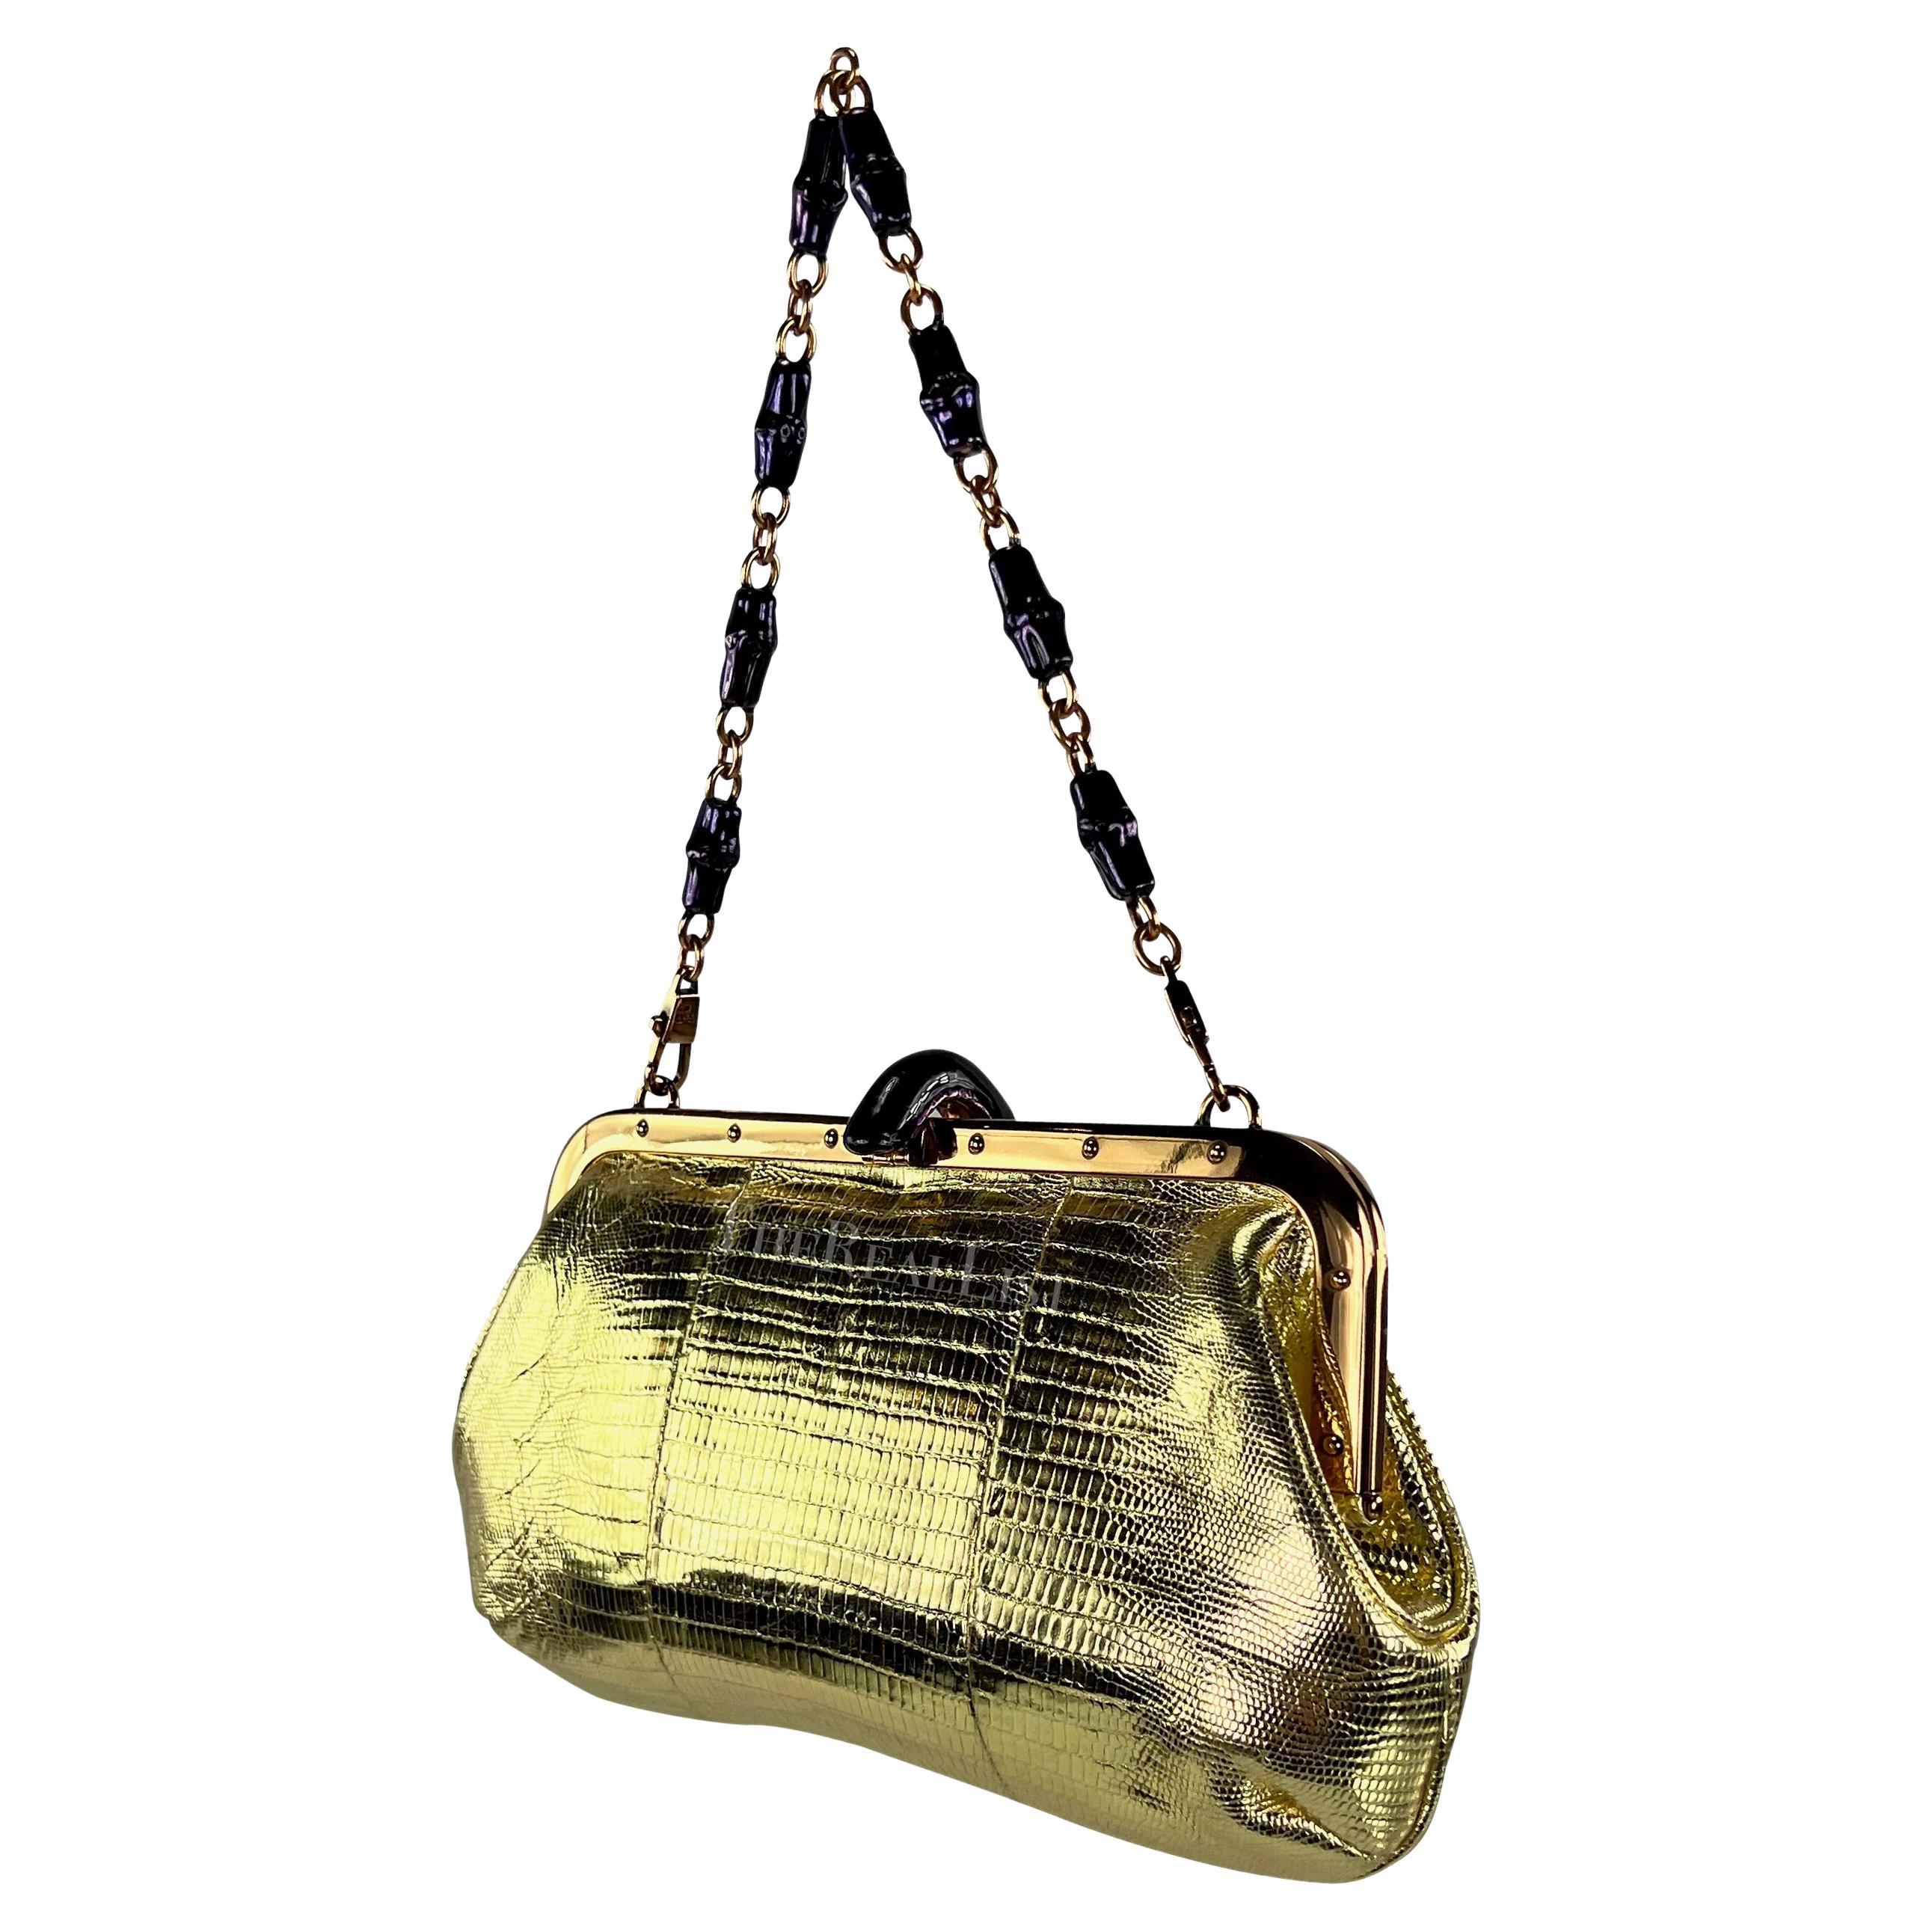 S/S  2004 Gucci by Tom Ford Gold Lizard Leather Enamel Snake Mini Bag 4